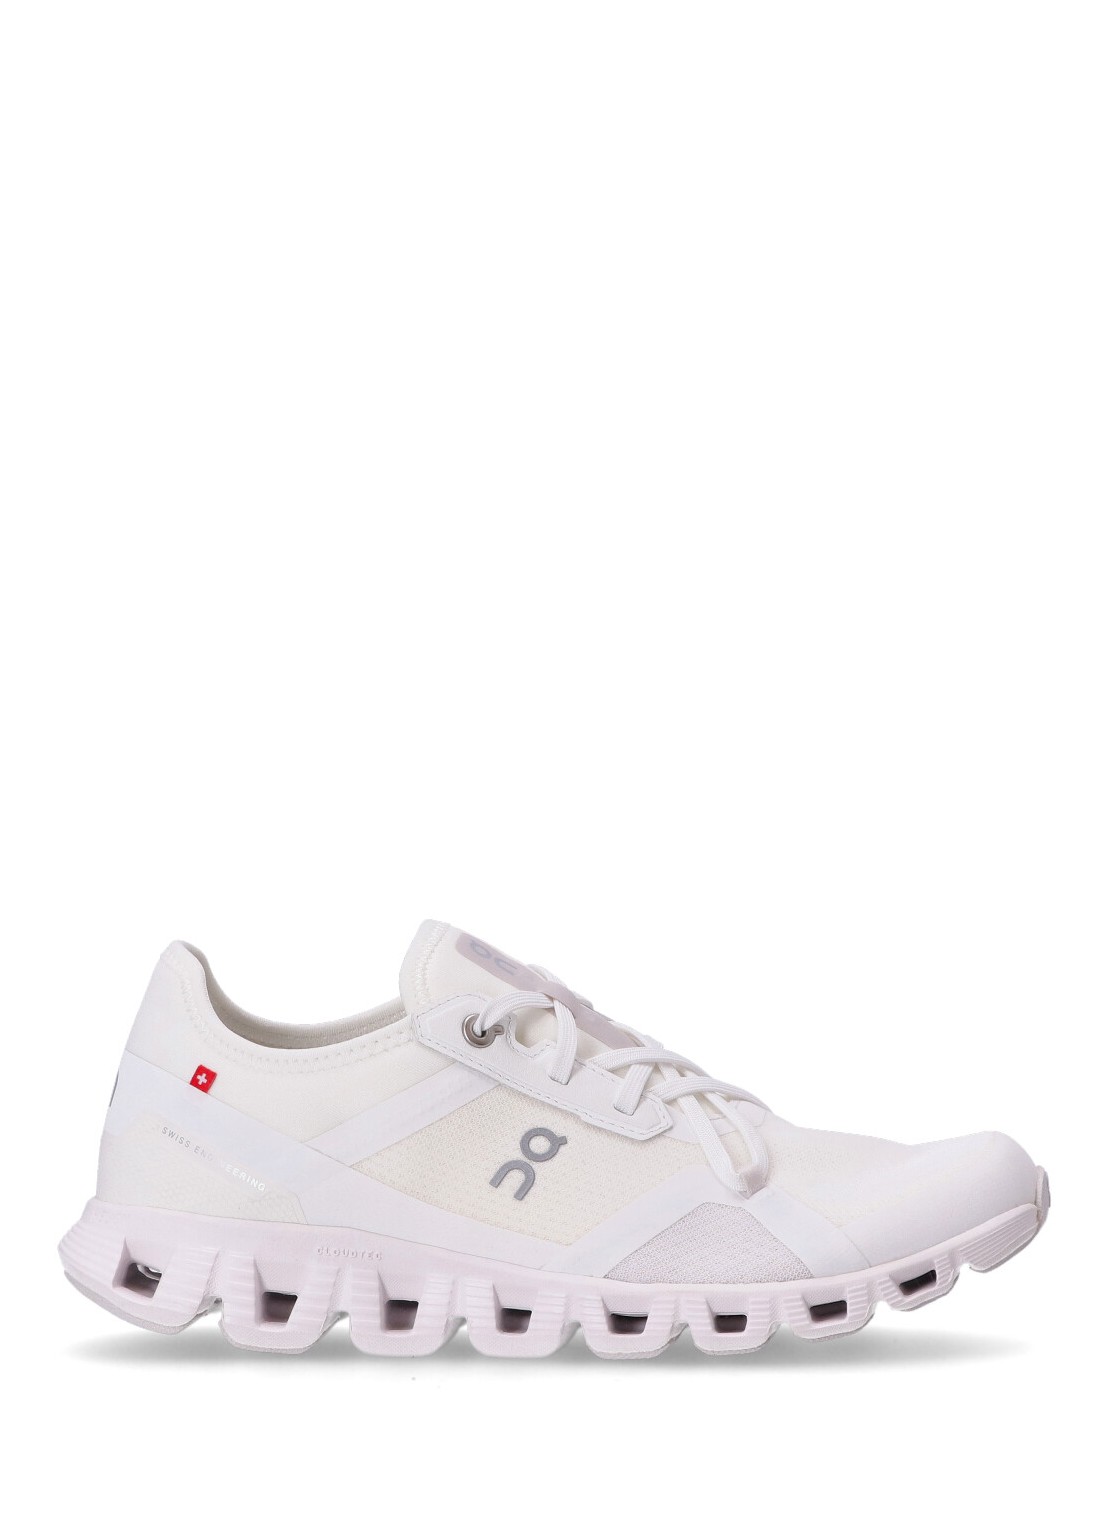 Sneaker on running sneaker woman cloud x 3 ad 3wd30301743 undyed white white talla 36
 